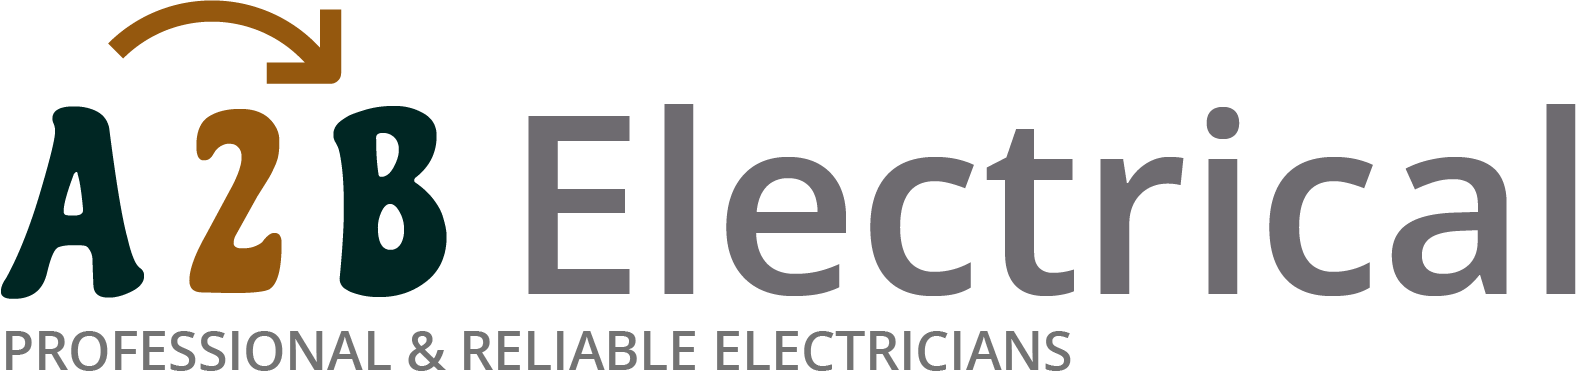 If you have electrical wiring problems in Barnet, we can provide an electrician to have a look for you. 